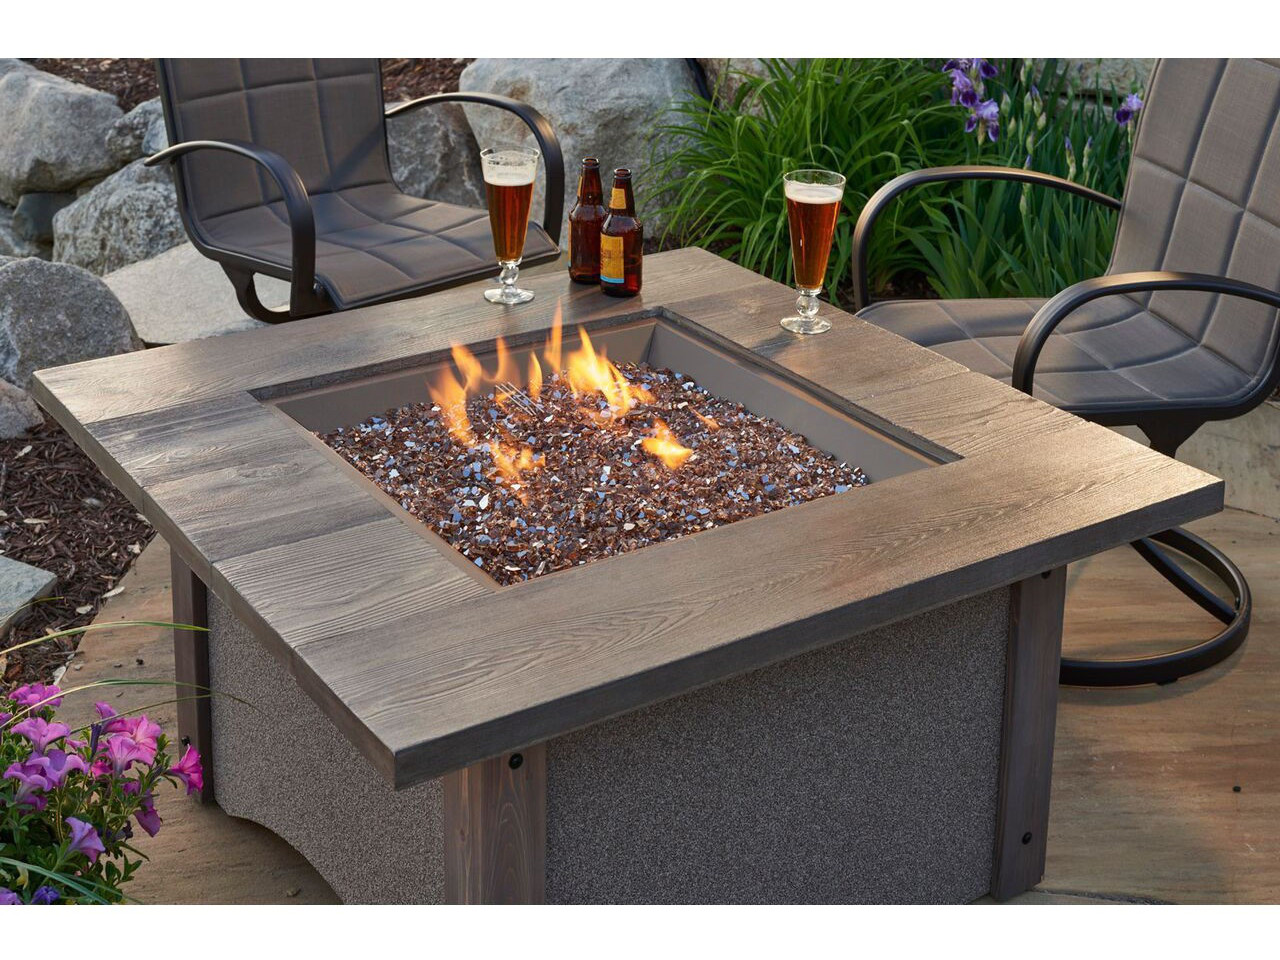 Patio Glow Fire Pit
 Outdoor GreatRoom Pine Ridge Square Fire Pit Table with